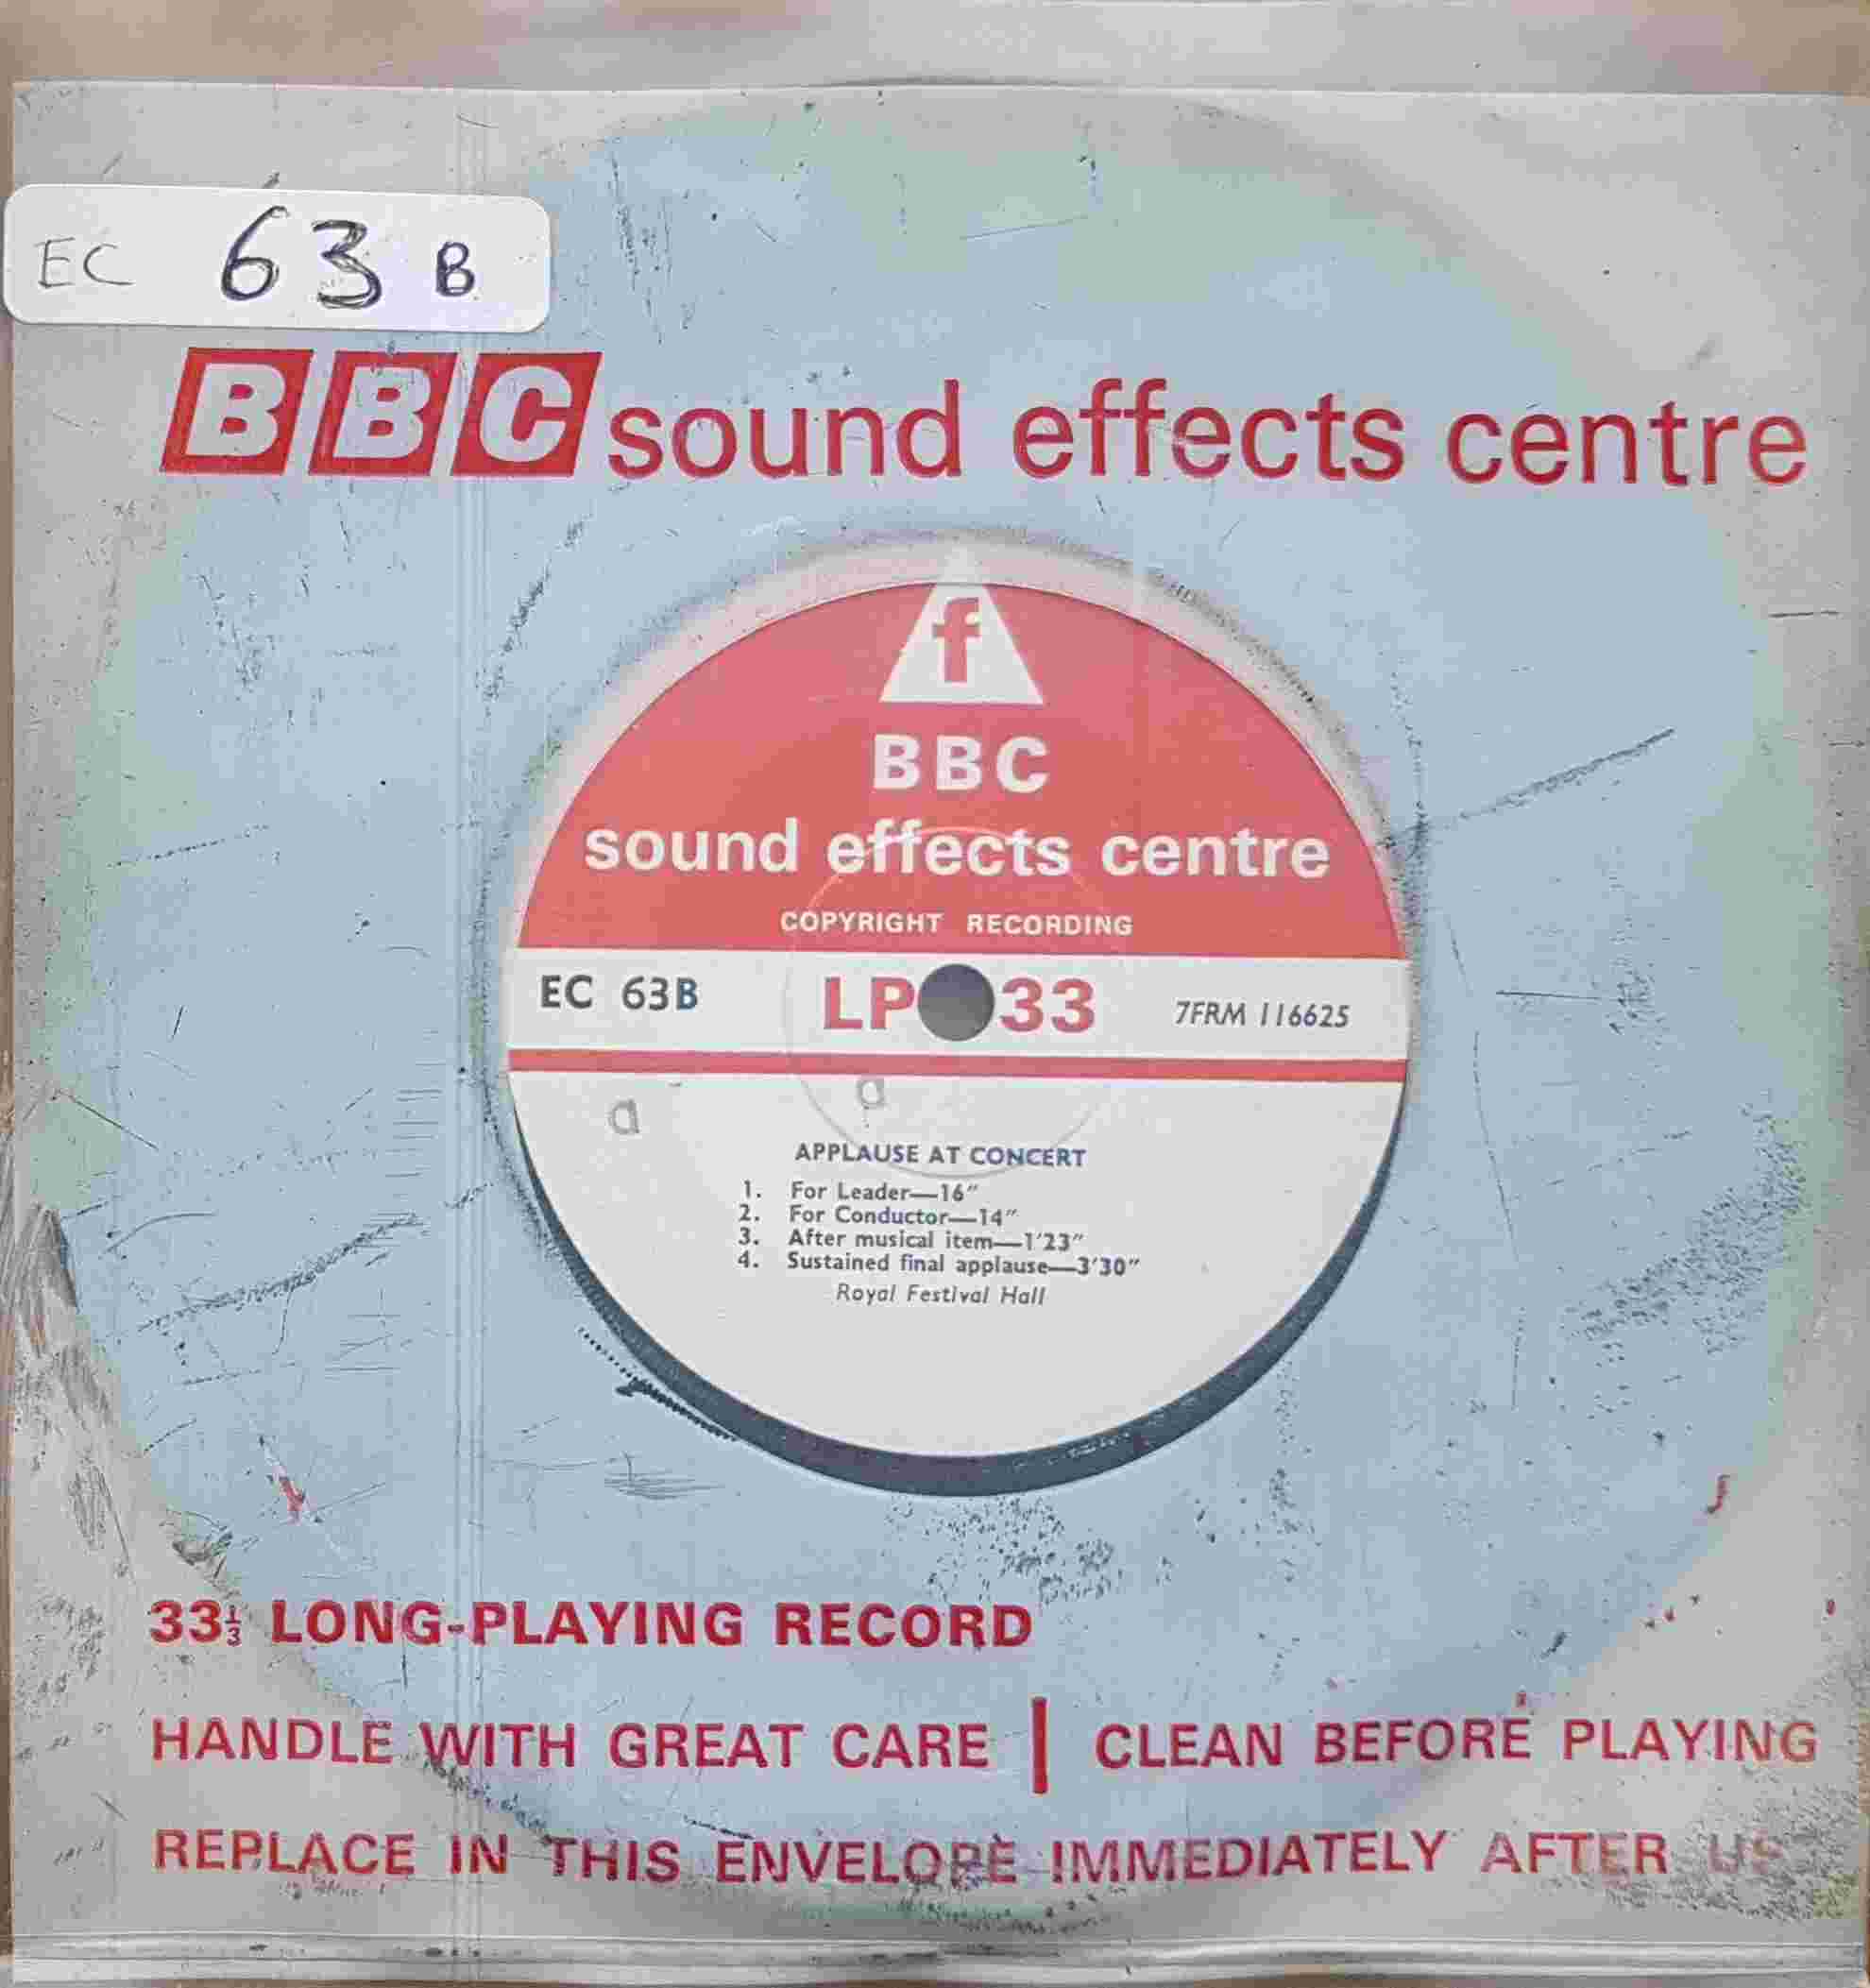 Picture of EC 63B Applause at concert by artist Not registered from the BBC records and Tapes library